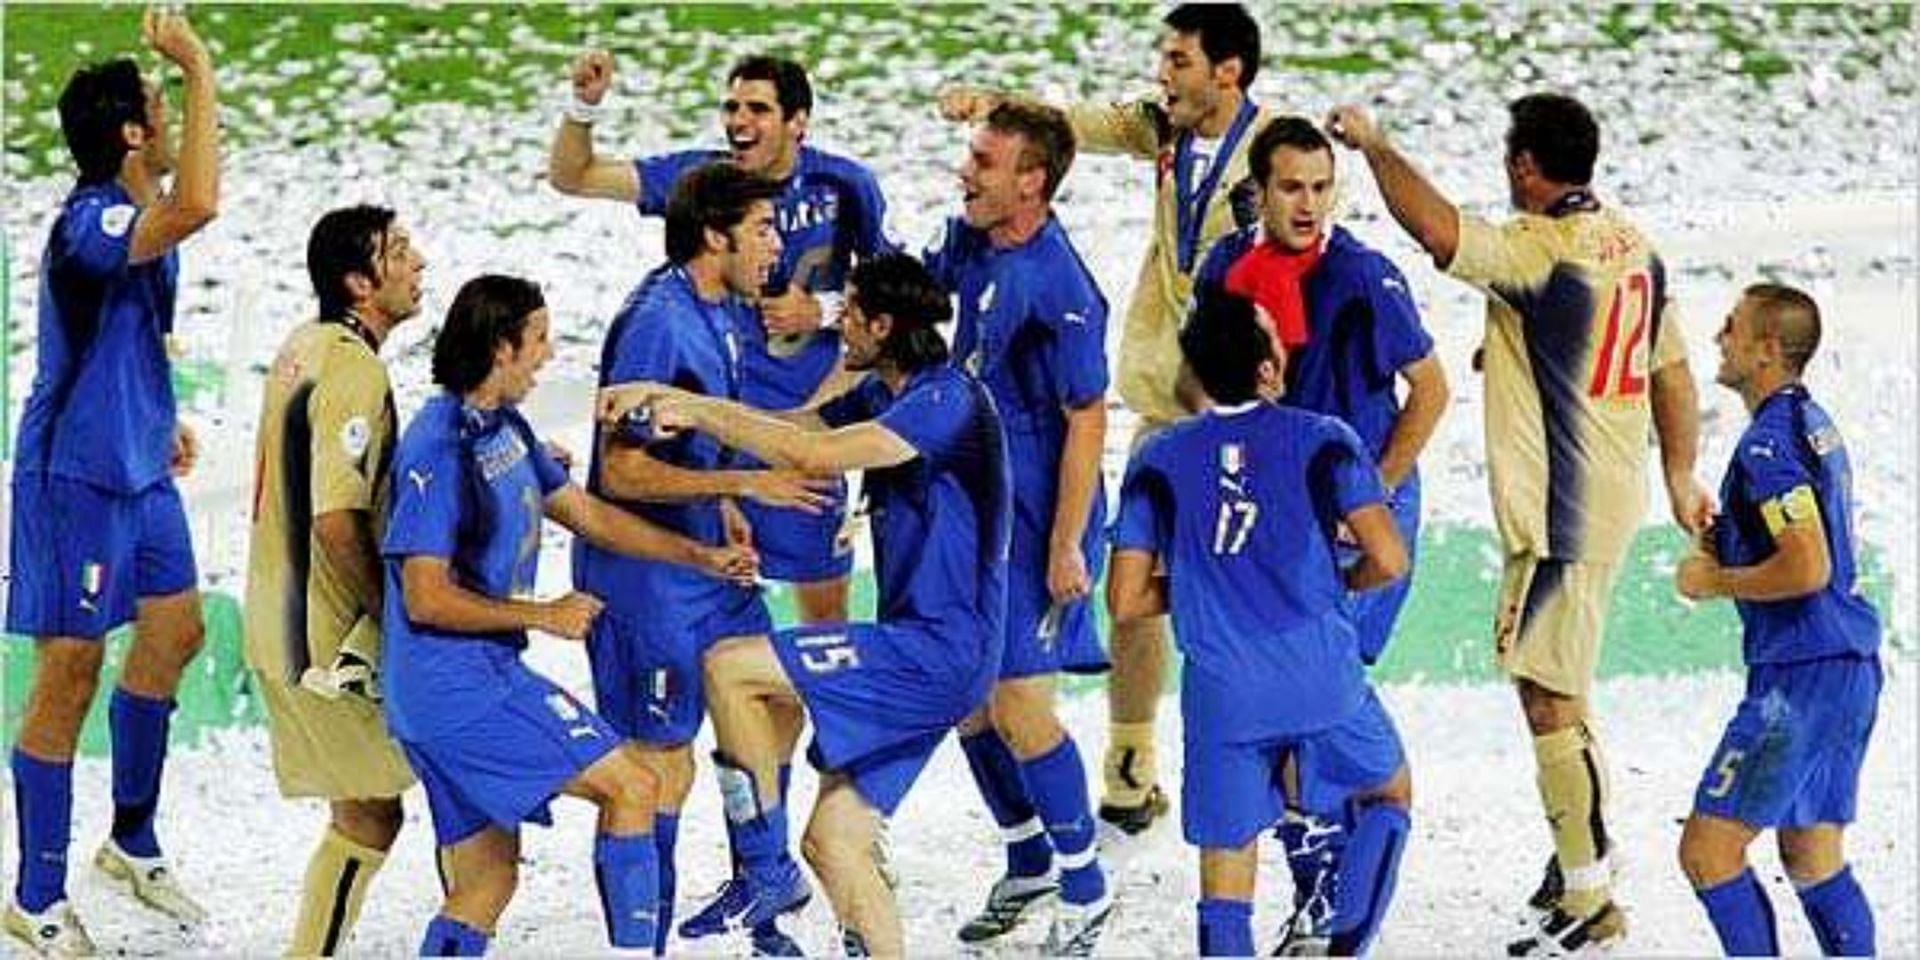 Alessandro Del Piero led fans in rome in a rendition of &#039;Seven Nation Army&#039; after they won the World Cup in 2006.